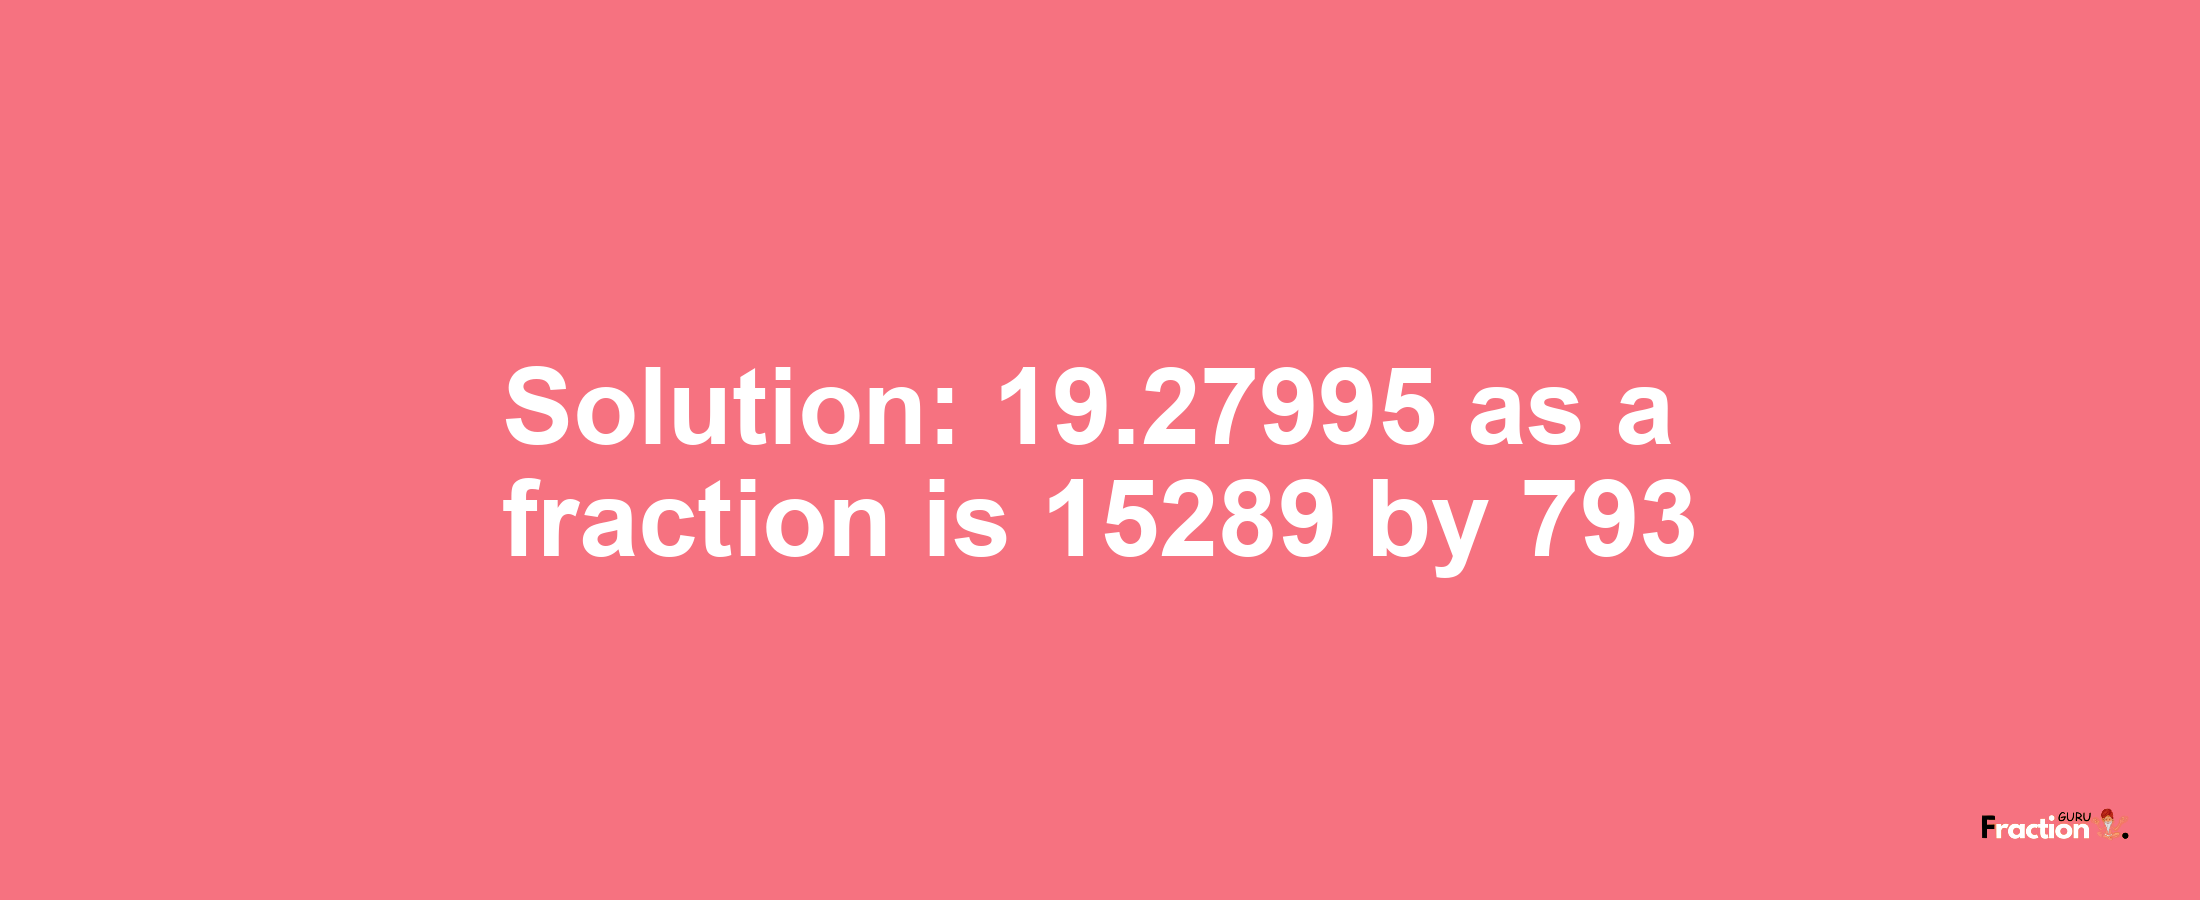 Solution:19.27995 as a fraction is 15289/793